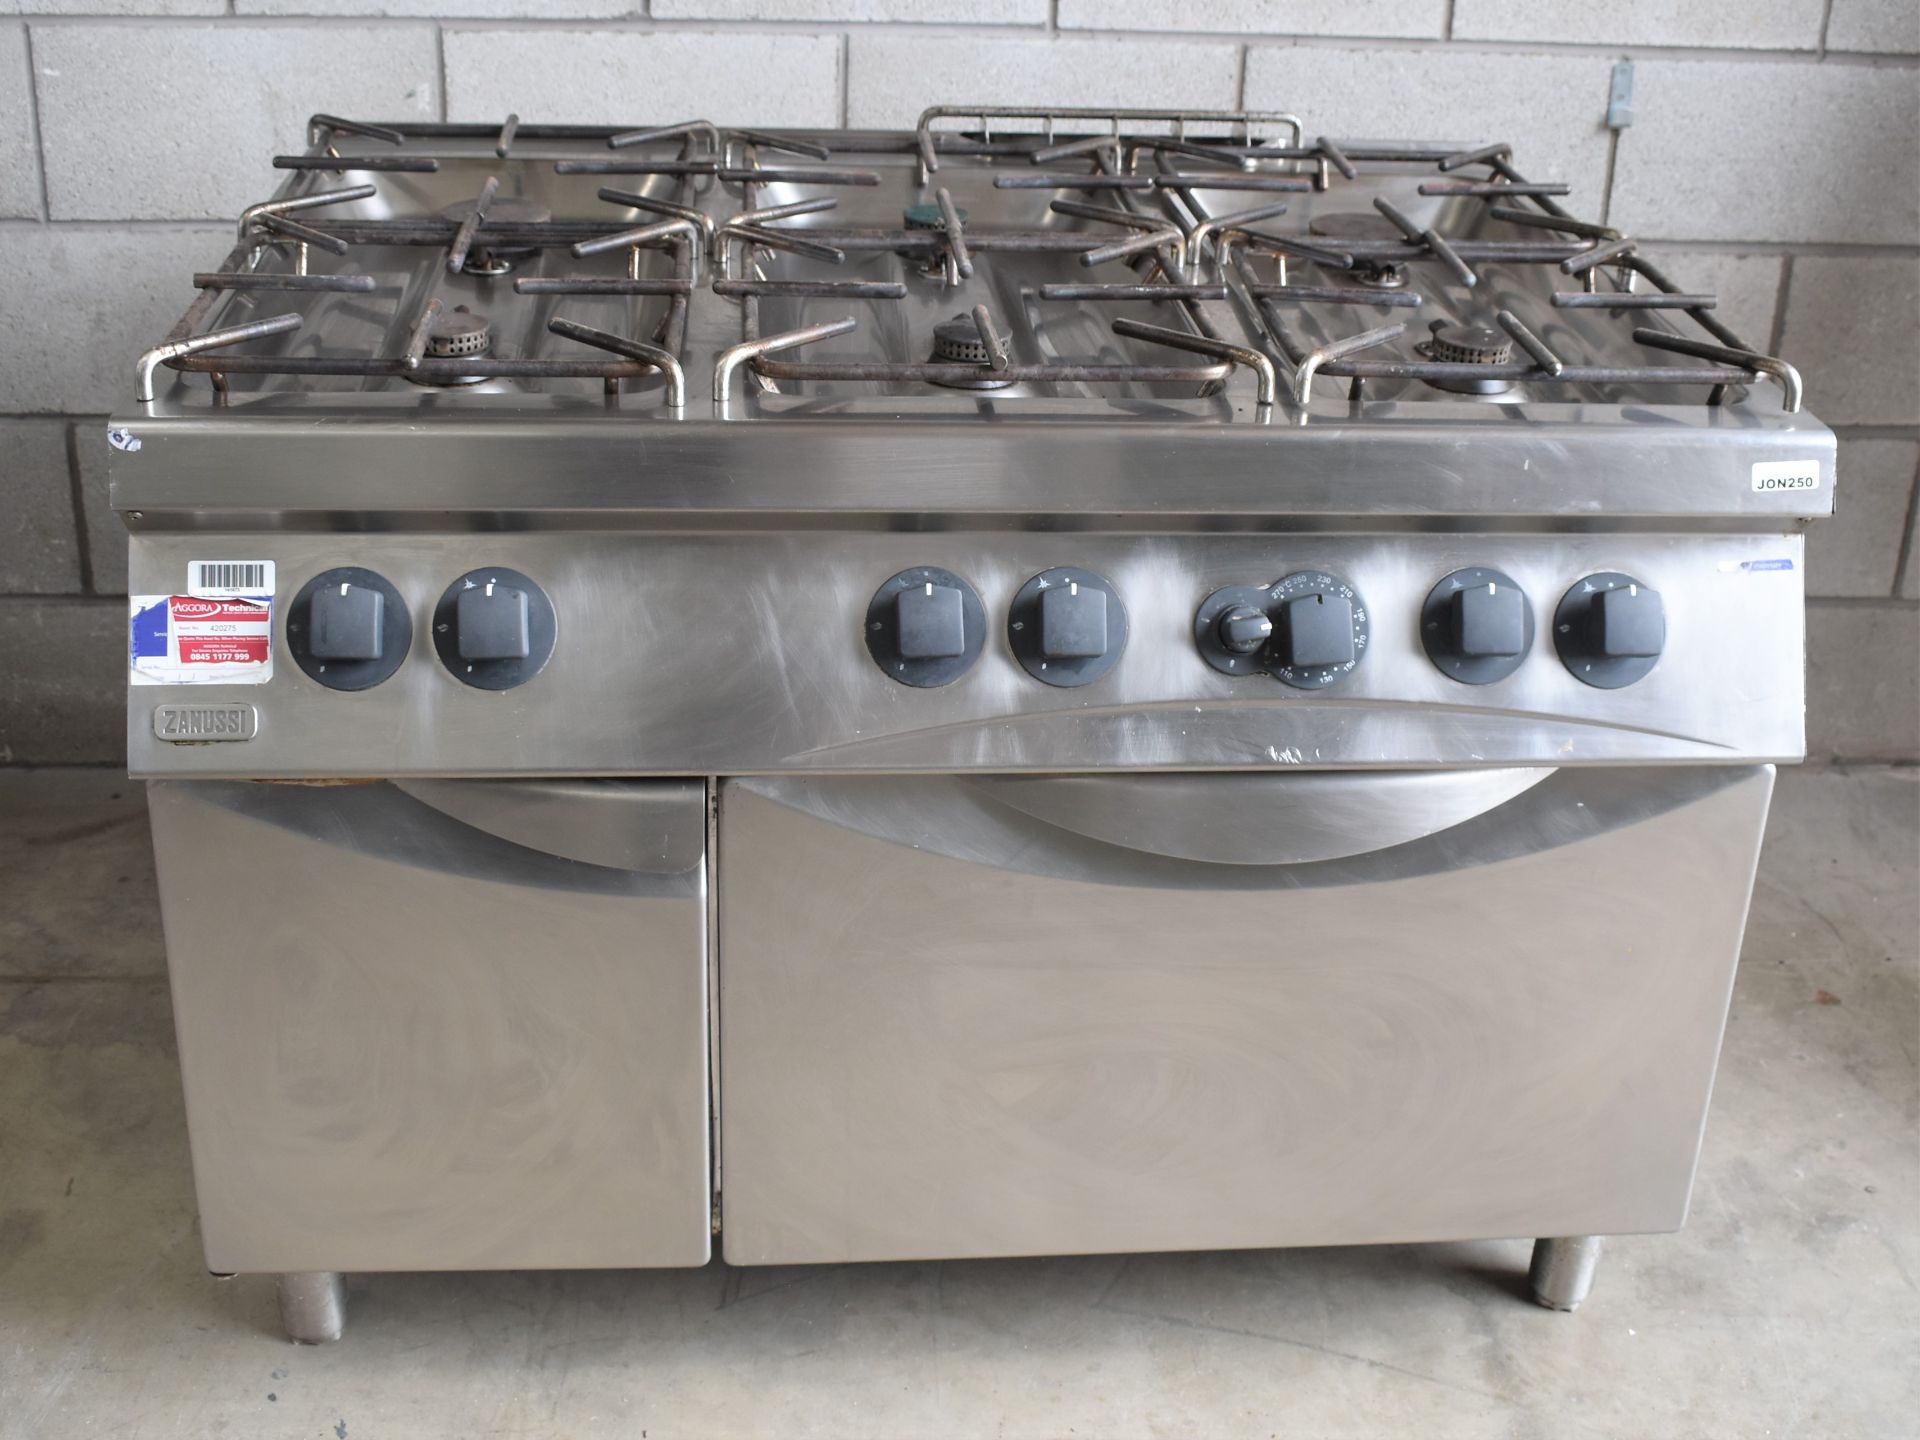 1 x Zanussi 6 Burner Gas Range Cooker with a Stainless Steel Exterior - Image 8 of 18